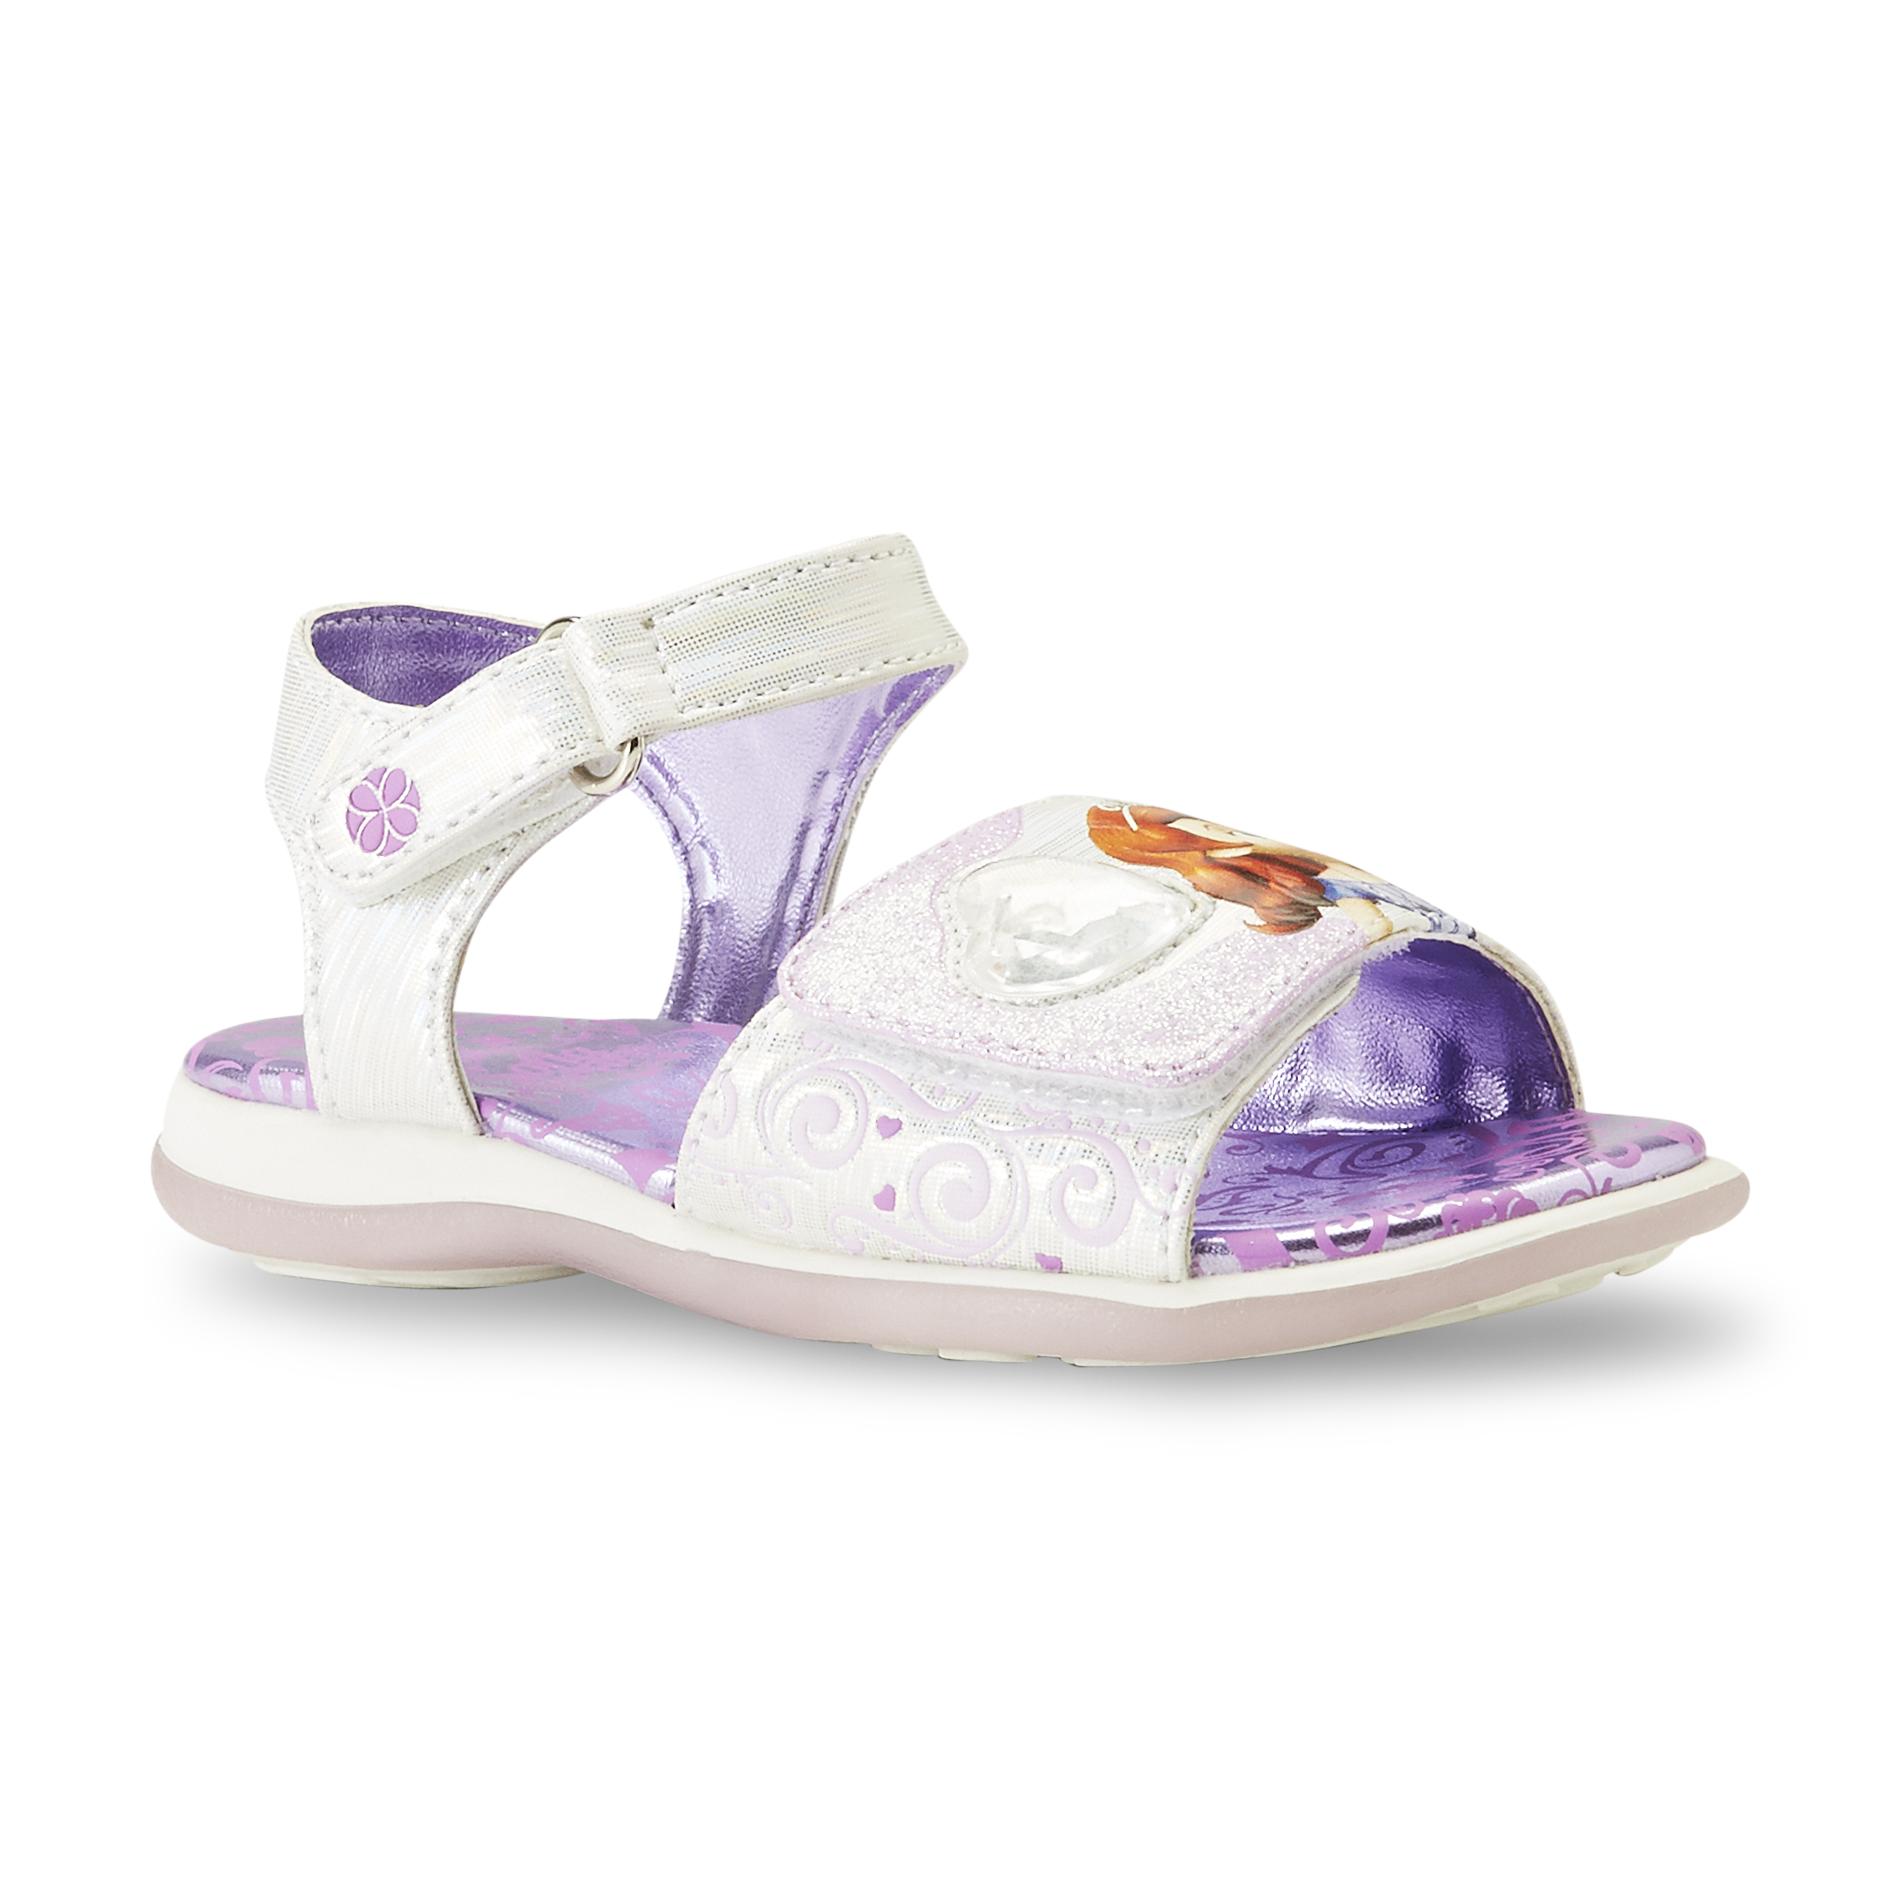 Disney Toddler Girl's Light-Up Silver/Purple Sandals - Sofia The First